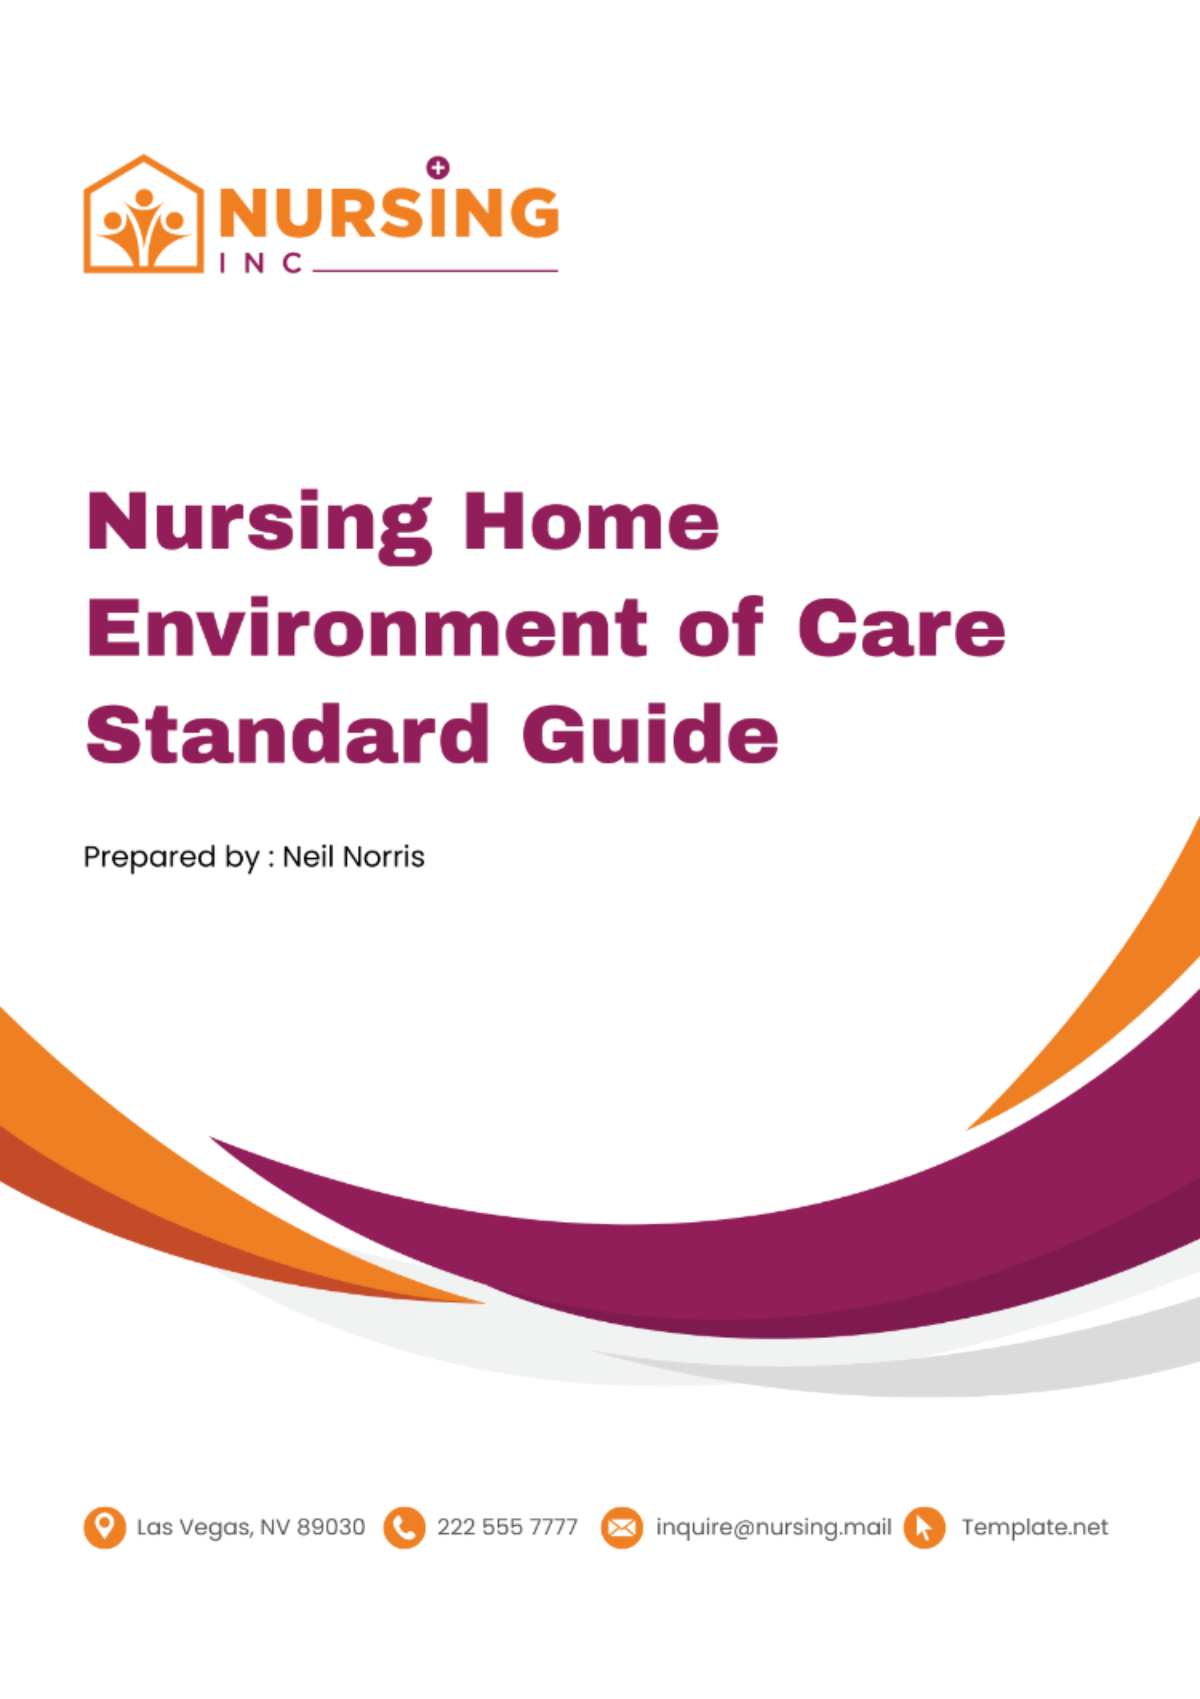 Nursing Home Environment of Care Standard Guide Template